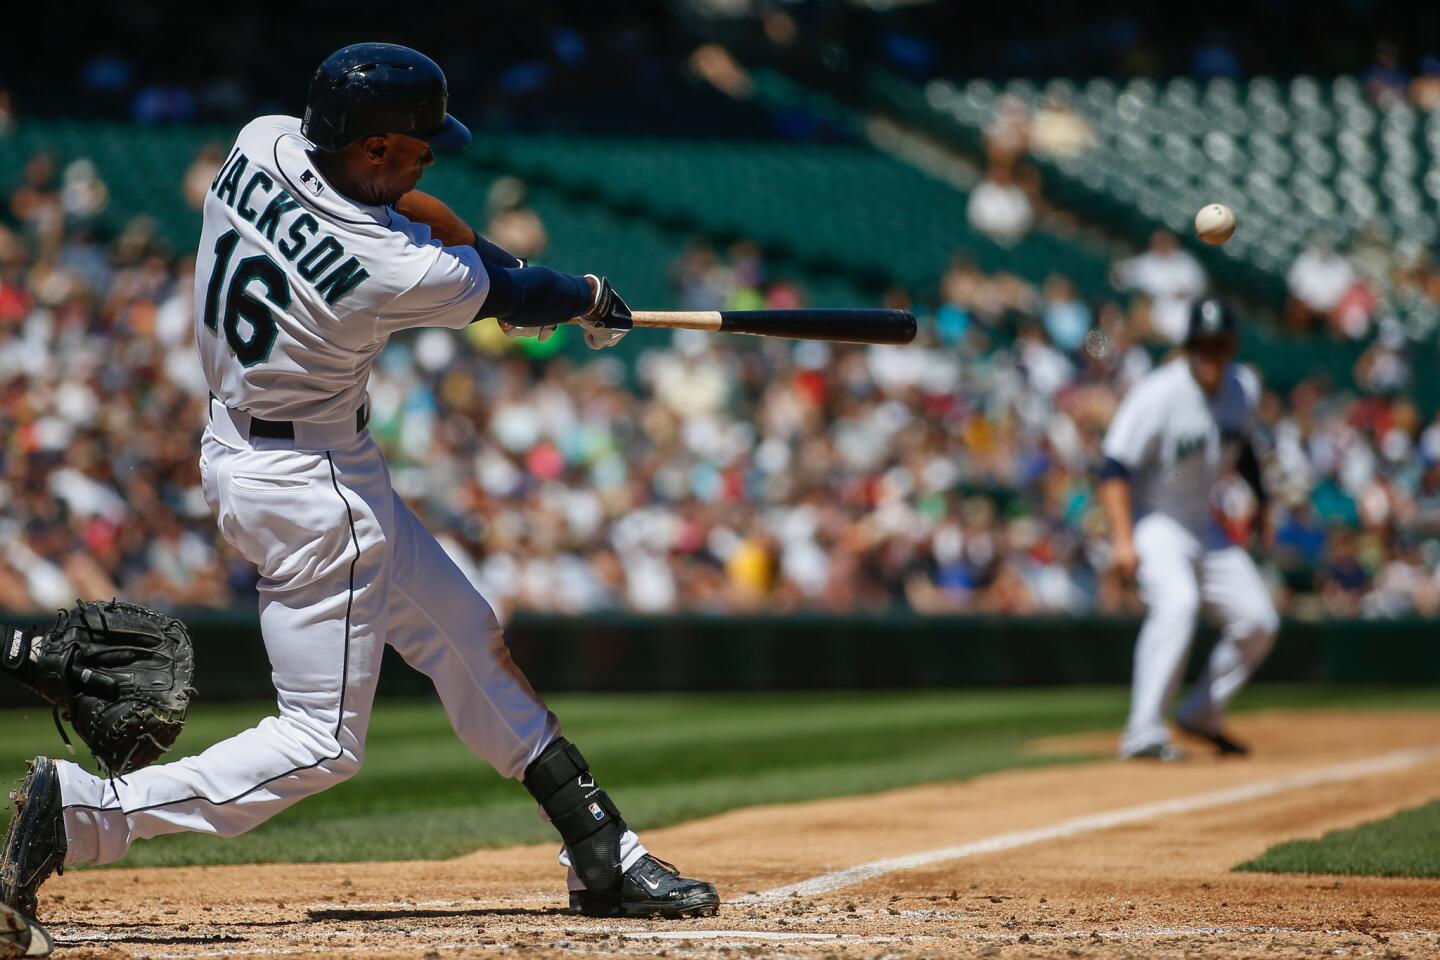 The Mariners' Austin Jackson hits a three-run double in the second inning.